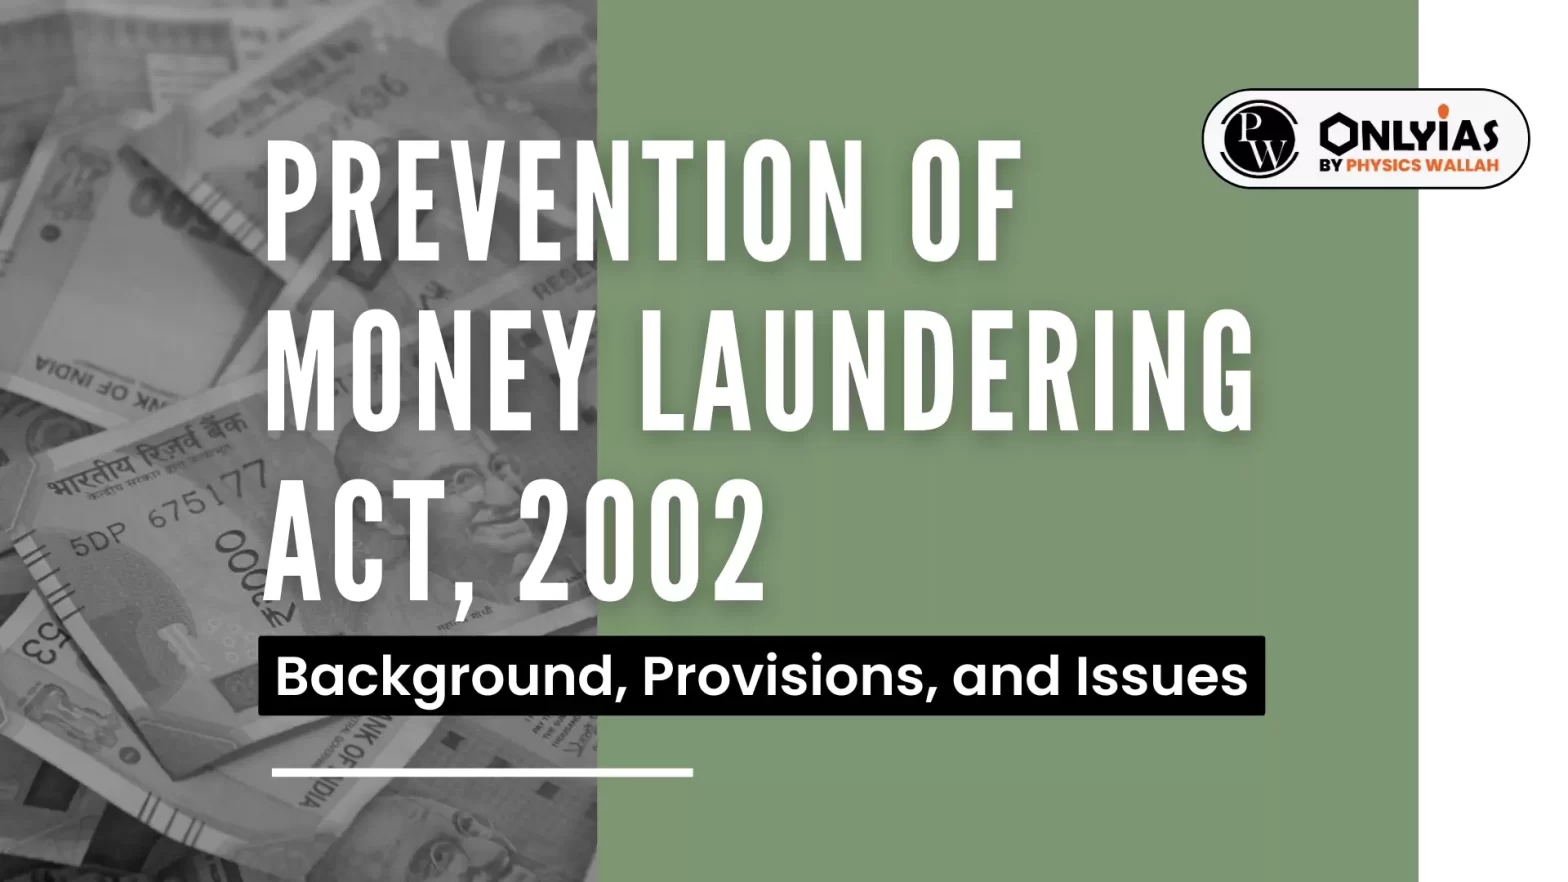 Prevention of Money Laundering Act, 2002: Background, Provisions, and Issues